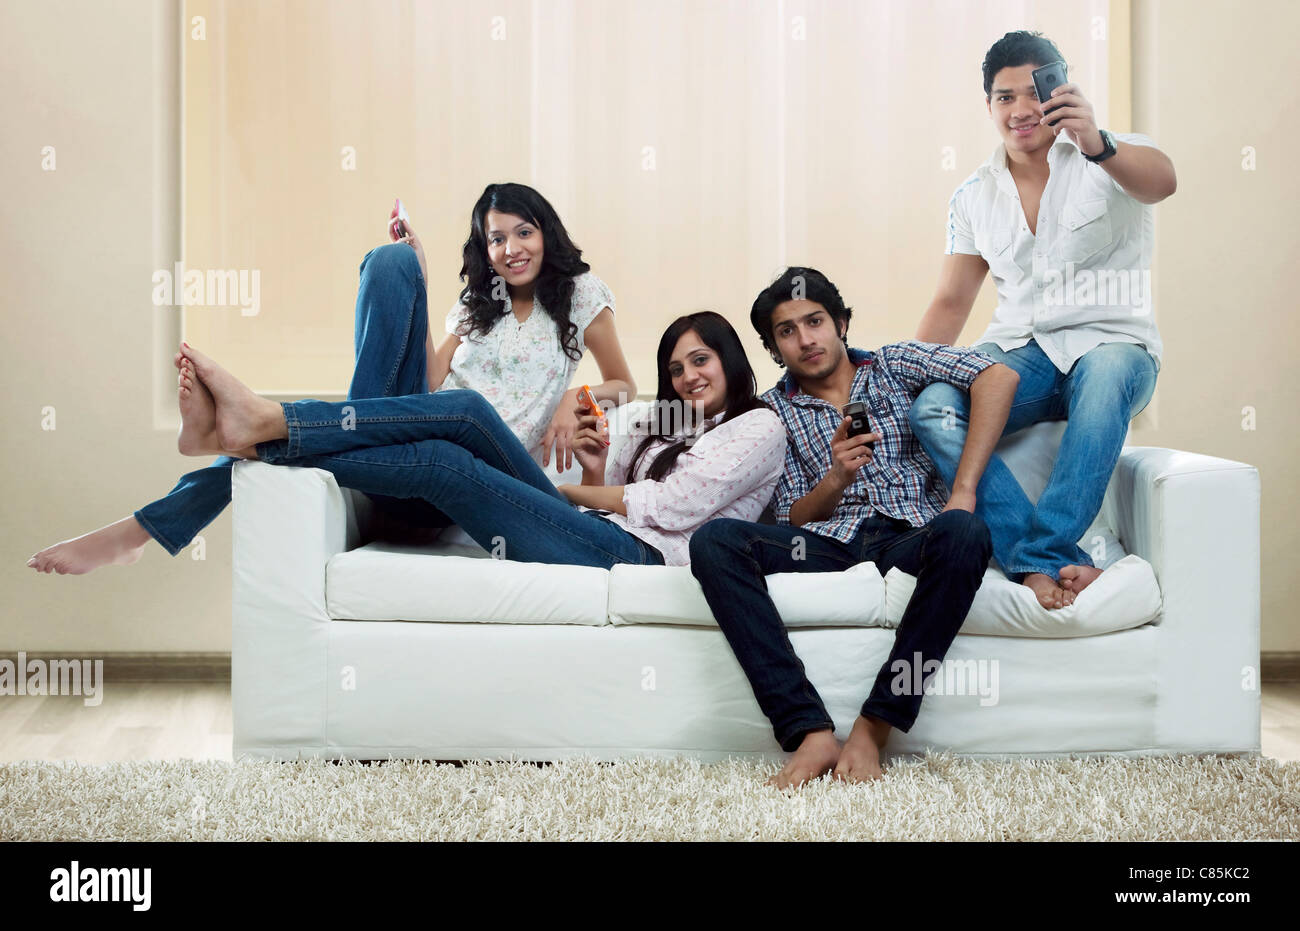 Youngsters with mobile phones sitting on a sofa Stock Photo